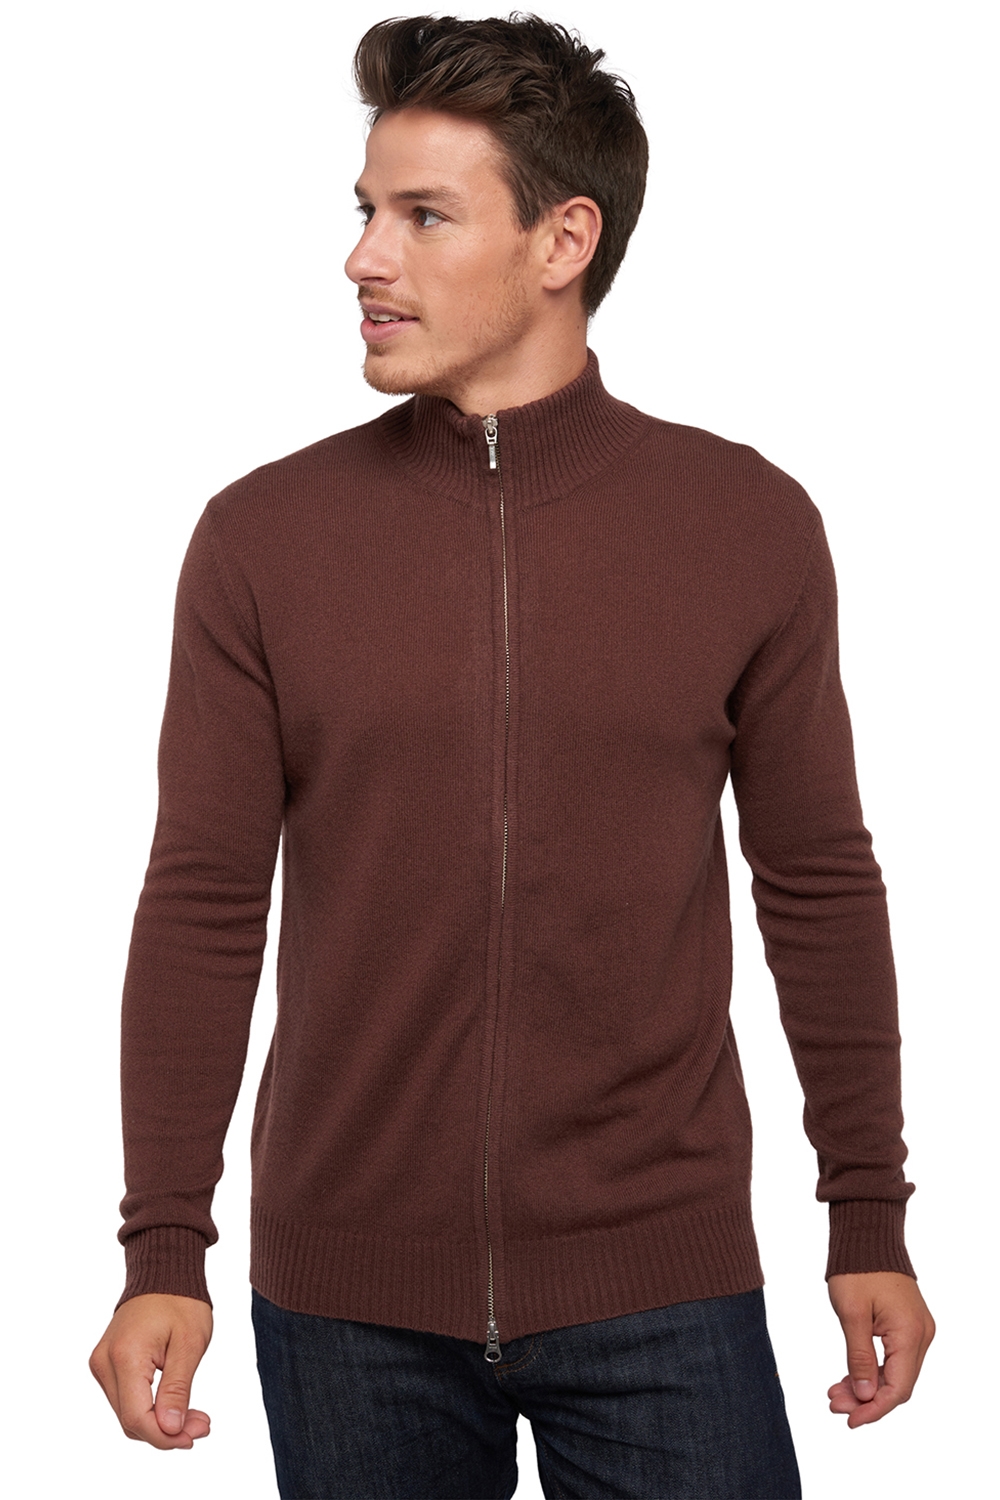 Cachemire pull homme zip capuche thobias first chocobrown l